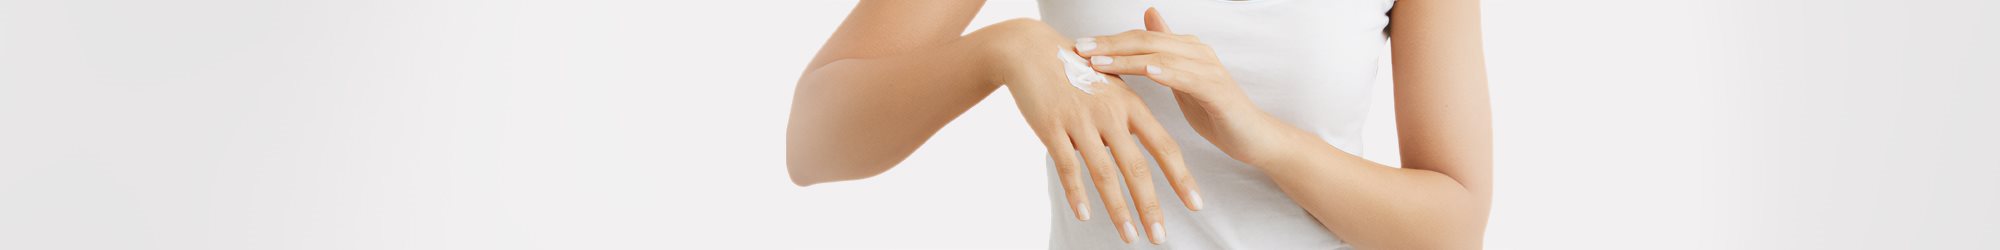 A closeup view of a model applying a Eucerin Eczema Relief cream product onto their right hand against a white background.